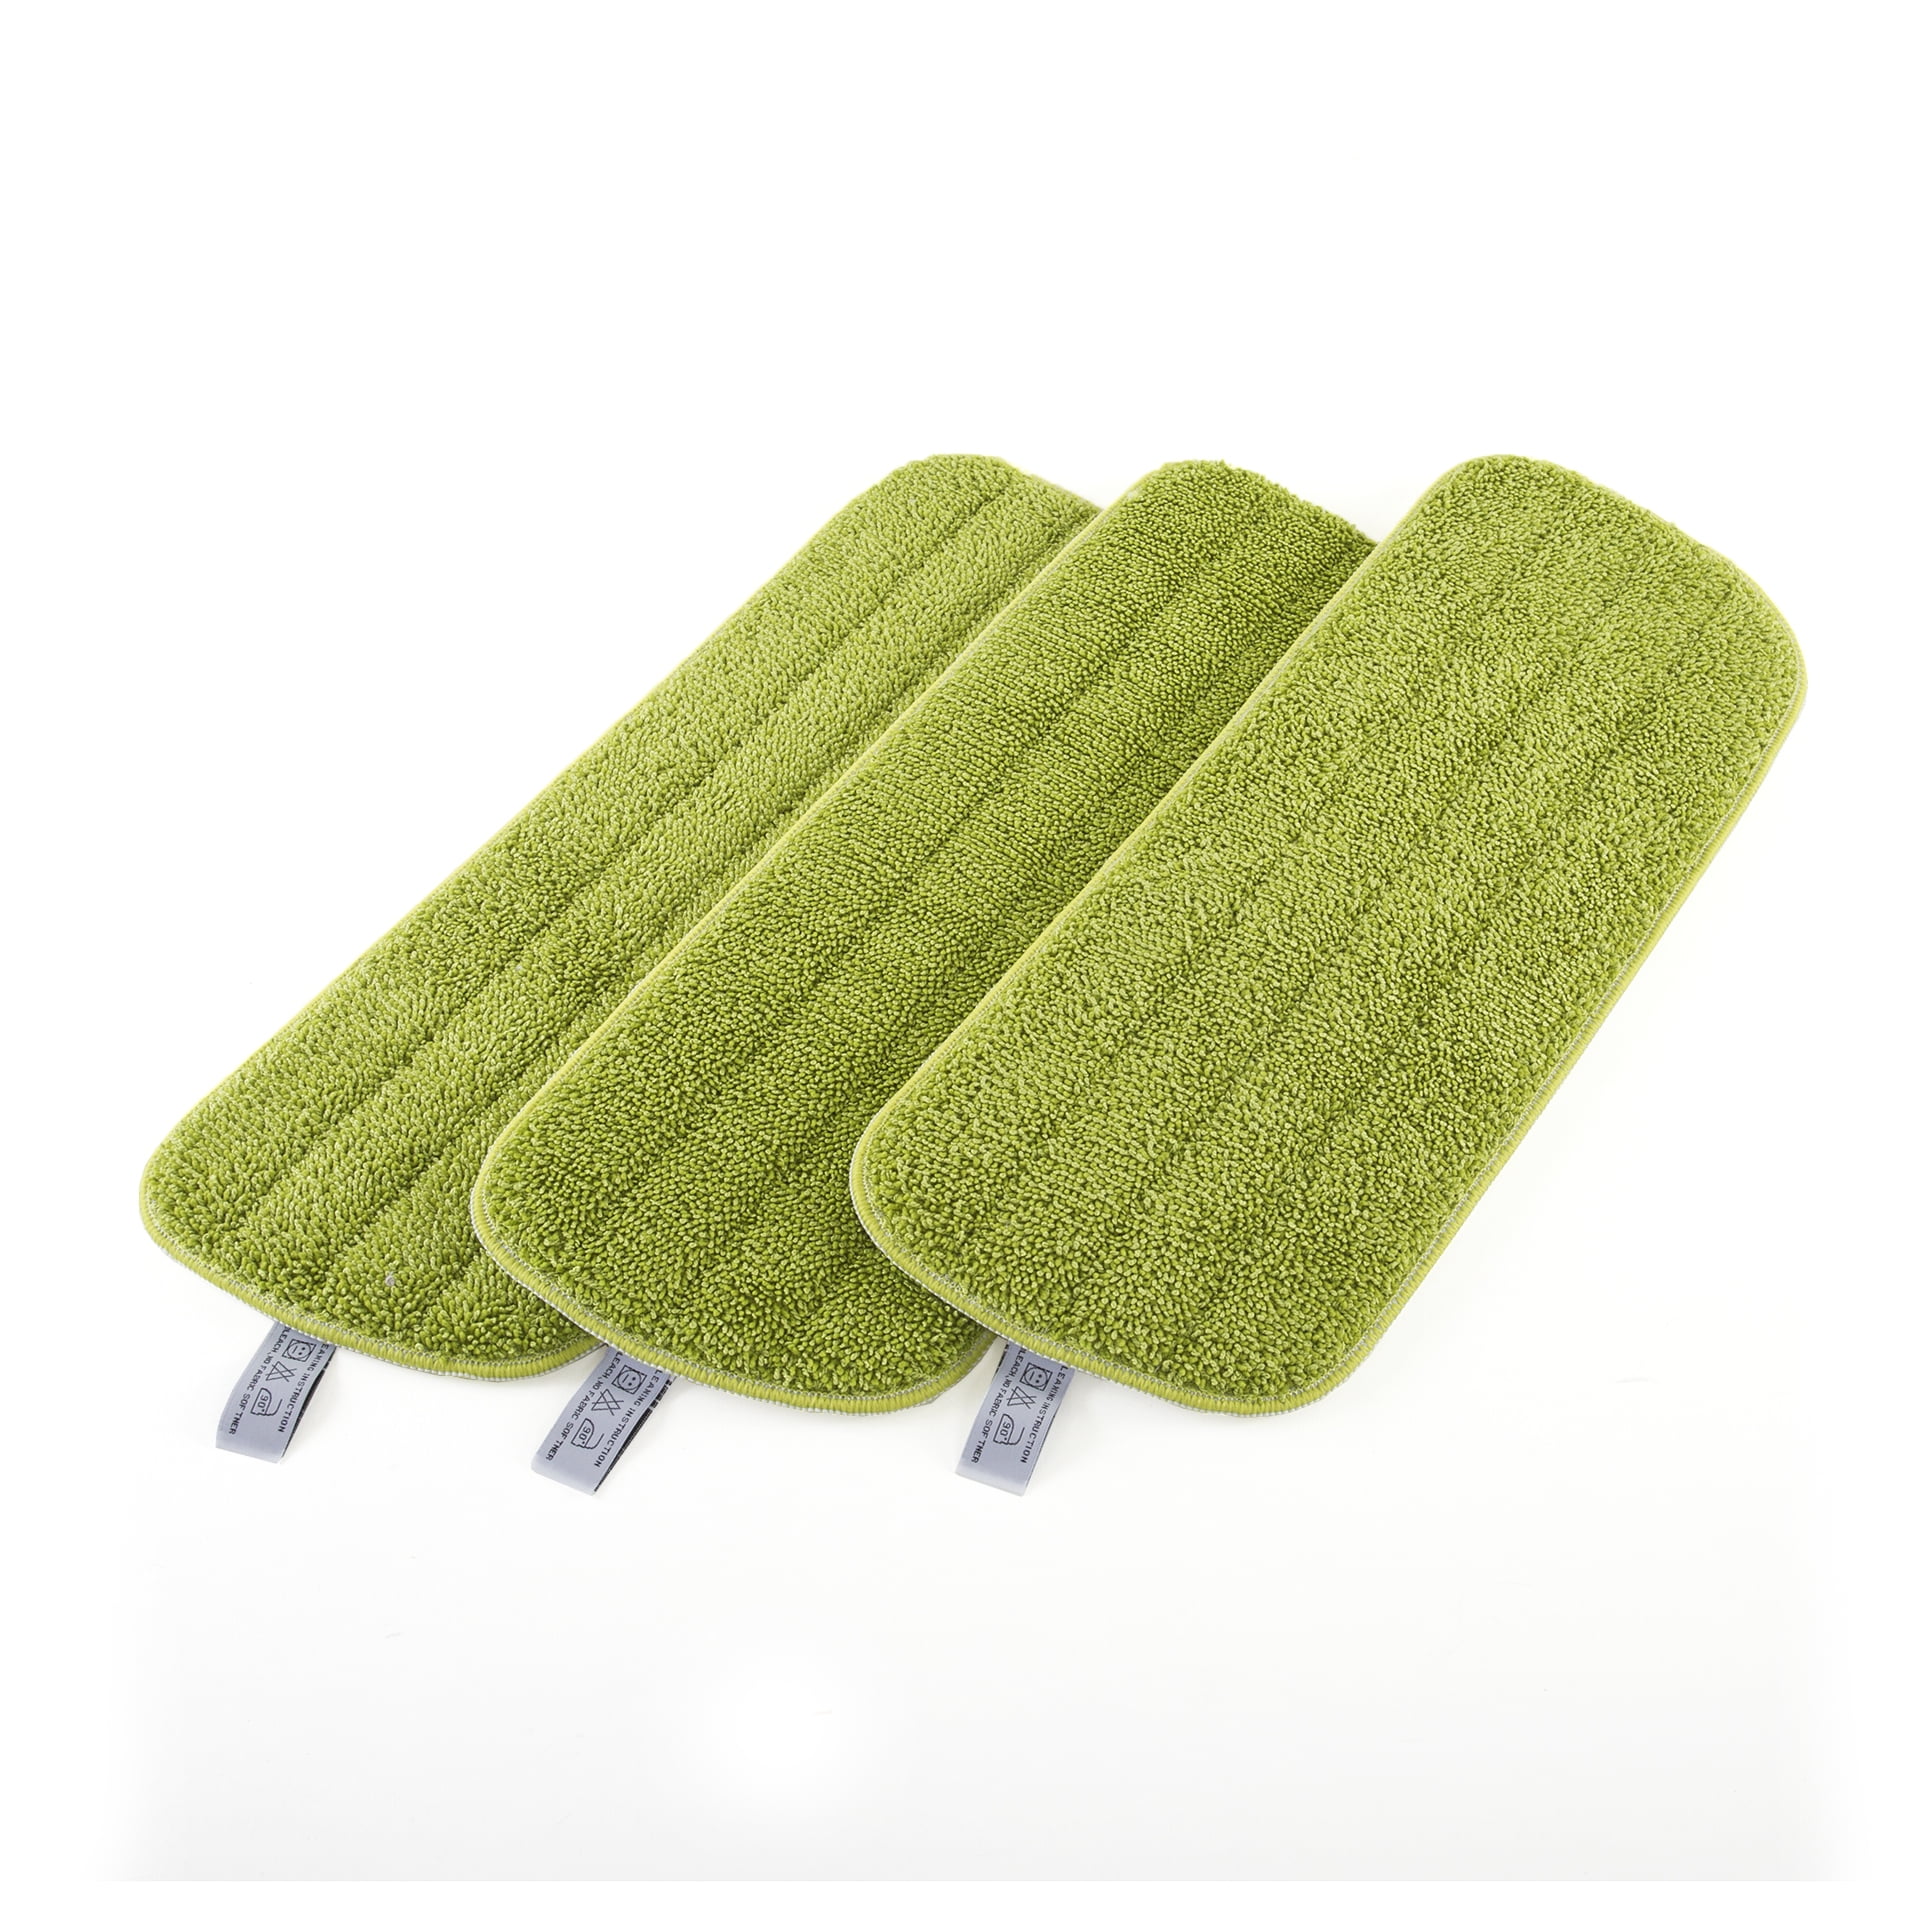 Reusable Dry Wet Mop Cloth Microfiber Cleaning Pad for Swiffer Sweeper Flat Mop 